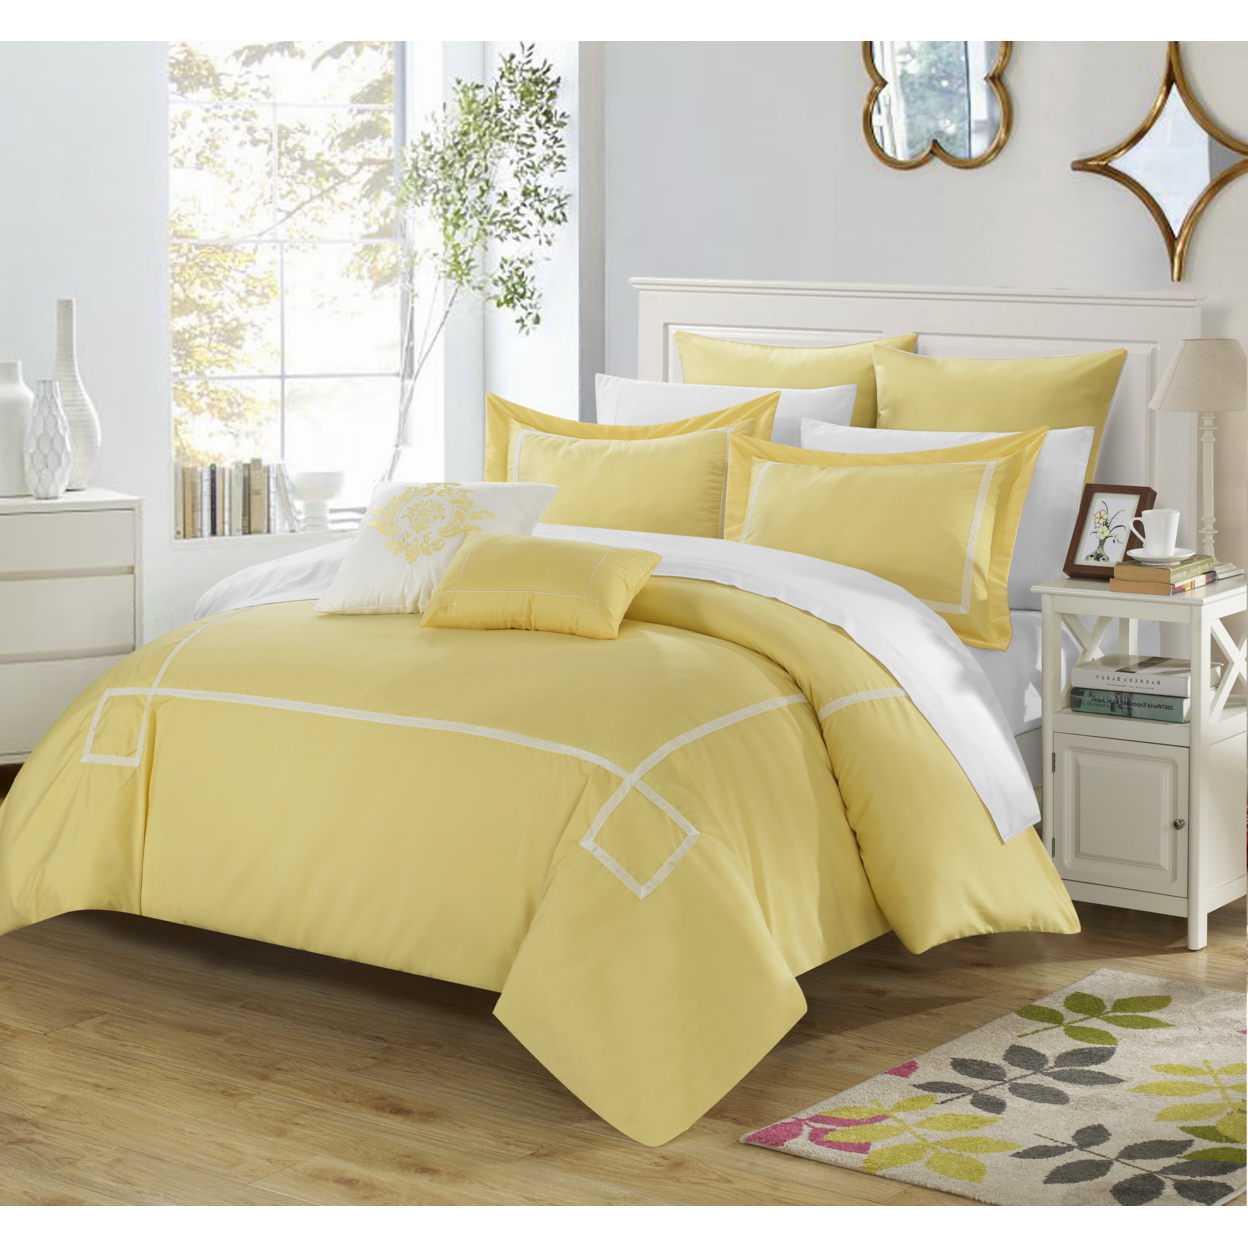 Chic Home Wilma - 7 Piece Embroidered Comforter Set - Yellow, King